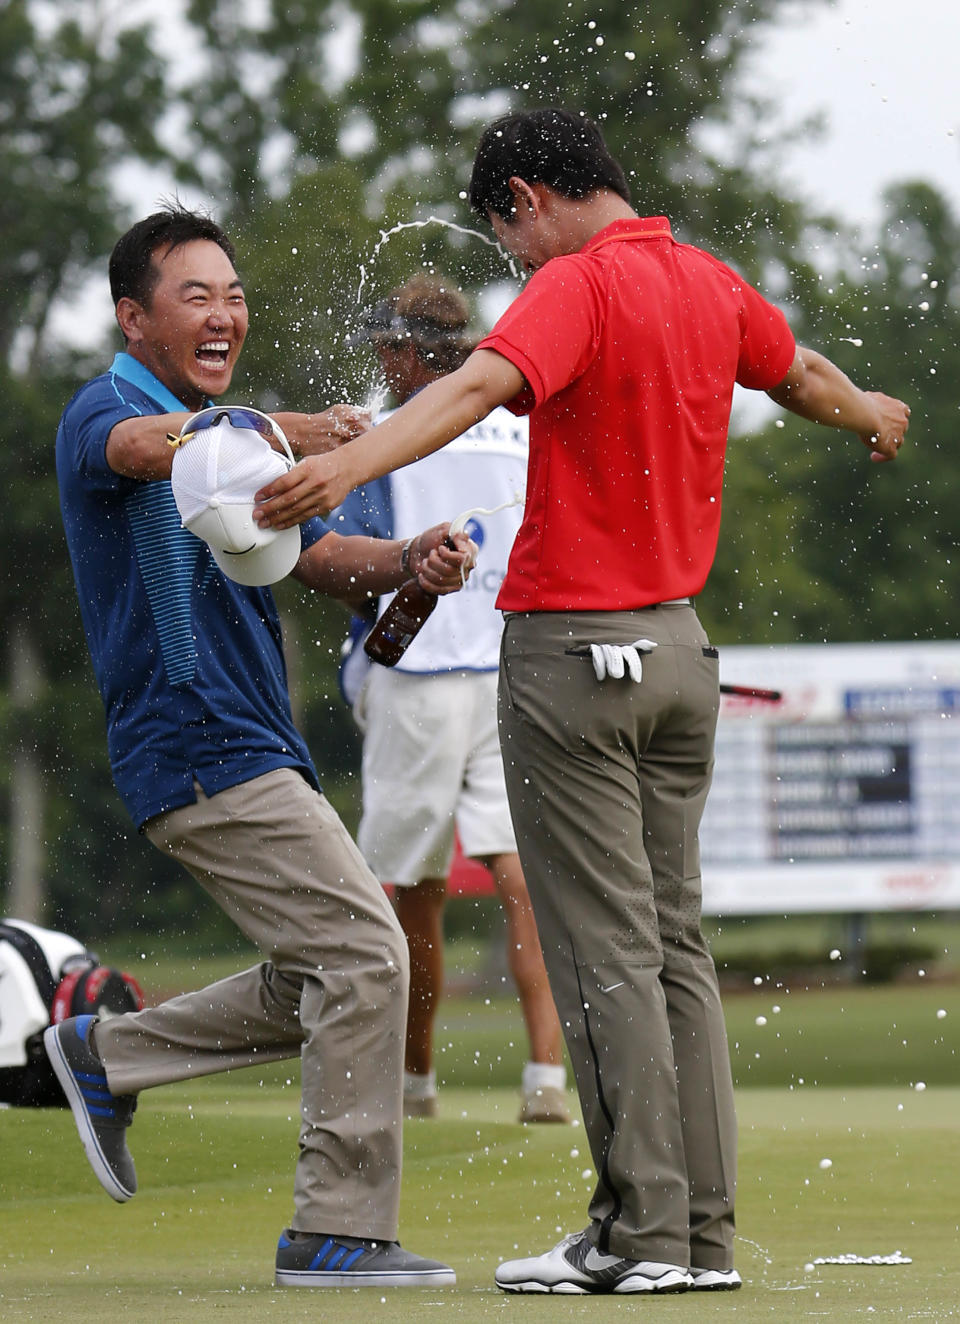 South Korean golfer Charlie Wi douses Noh Seung-yul, right, with beer on the 18th green after Noh won the Zurich Classic golf tournament at TPC Louisiana in Avondale, La., Sunday, April 27, 2014.(AP Photo/Bill Haber)